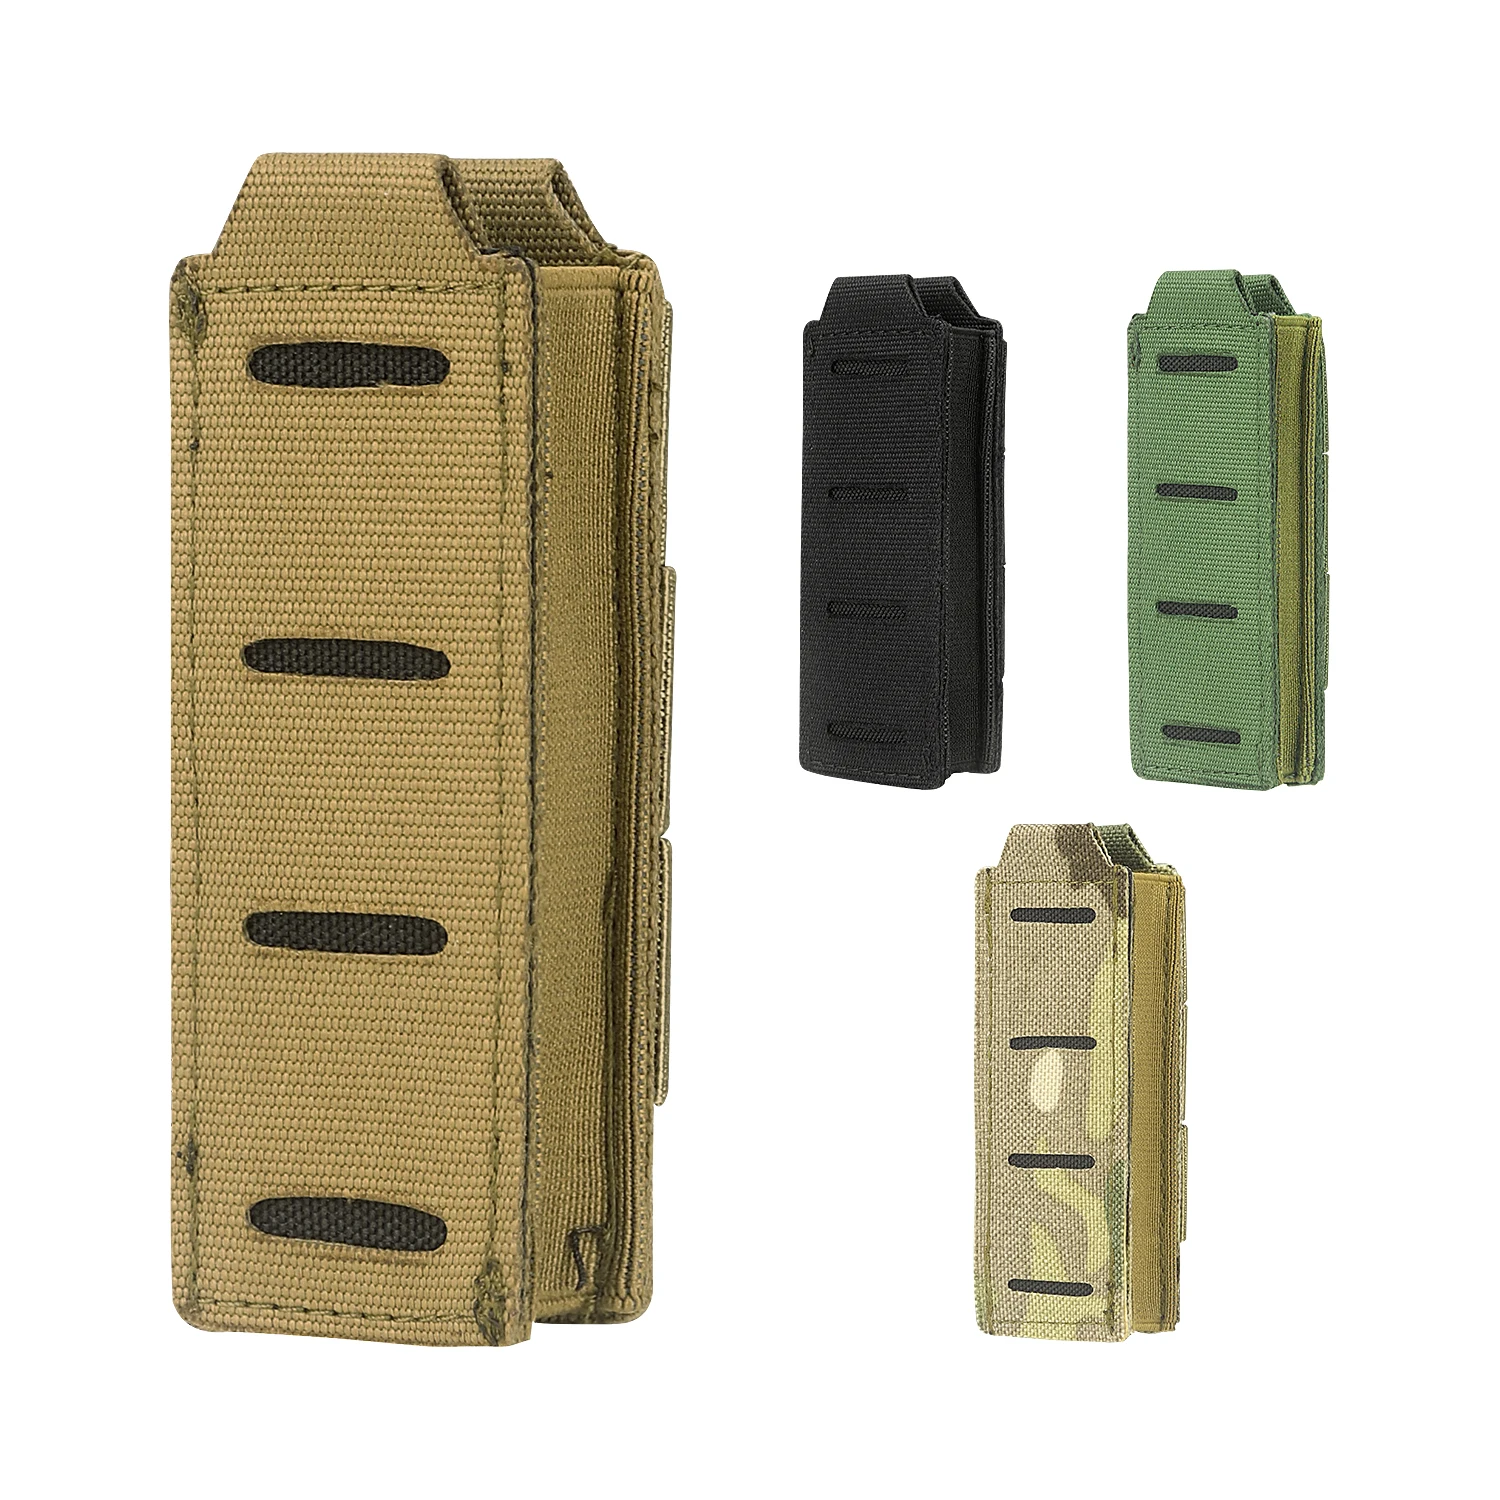 

Tactical 9mm Mag Pouch Pistol Single Magazine Military Molle Pouch Gun Hunting Accessories Multi Functional Molle Accessory Pack